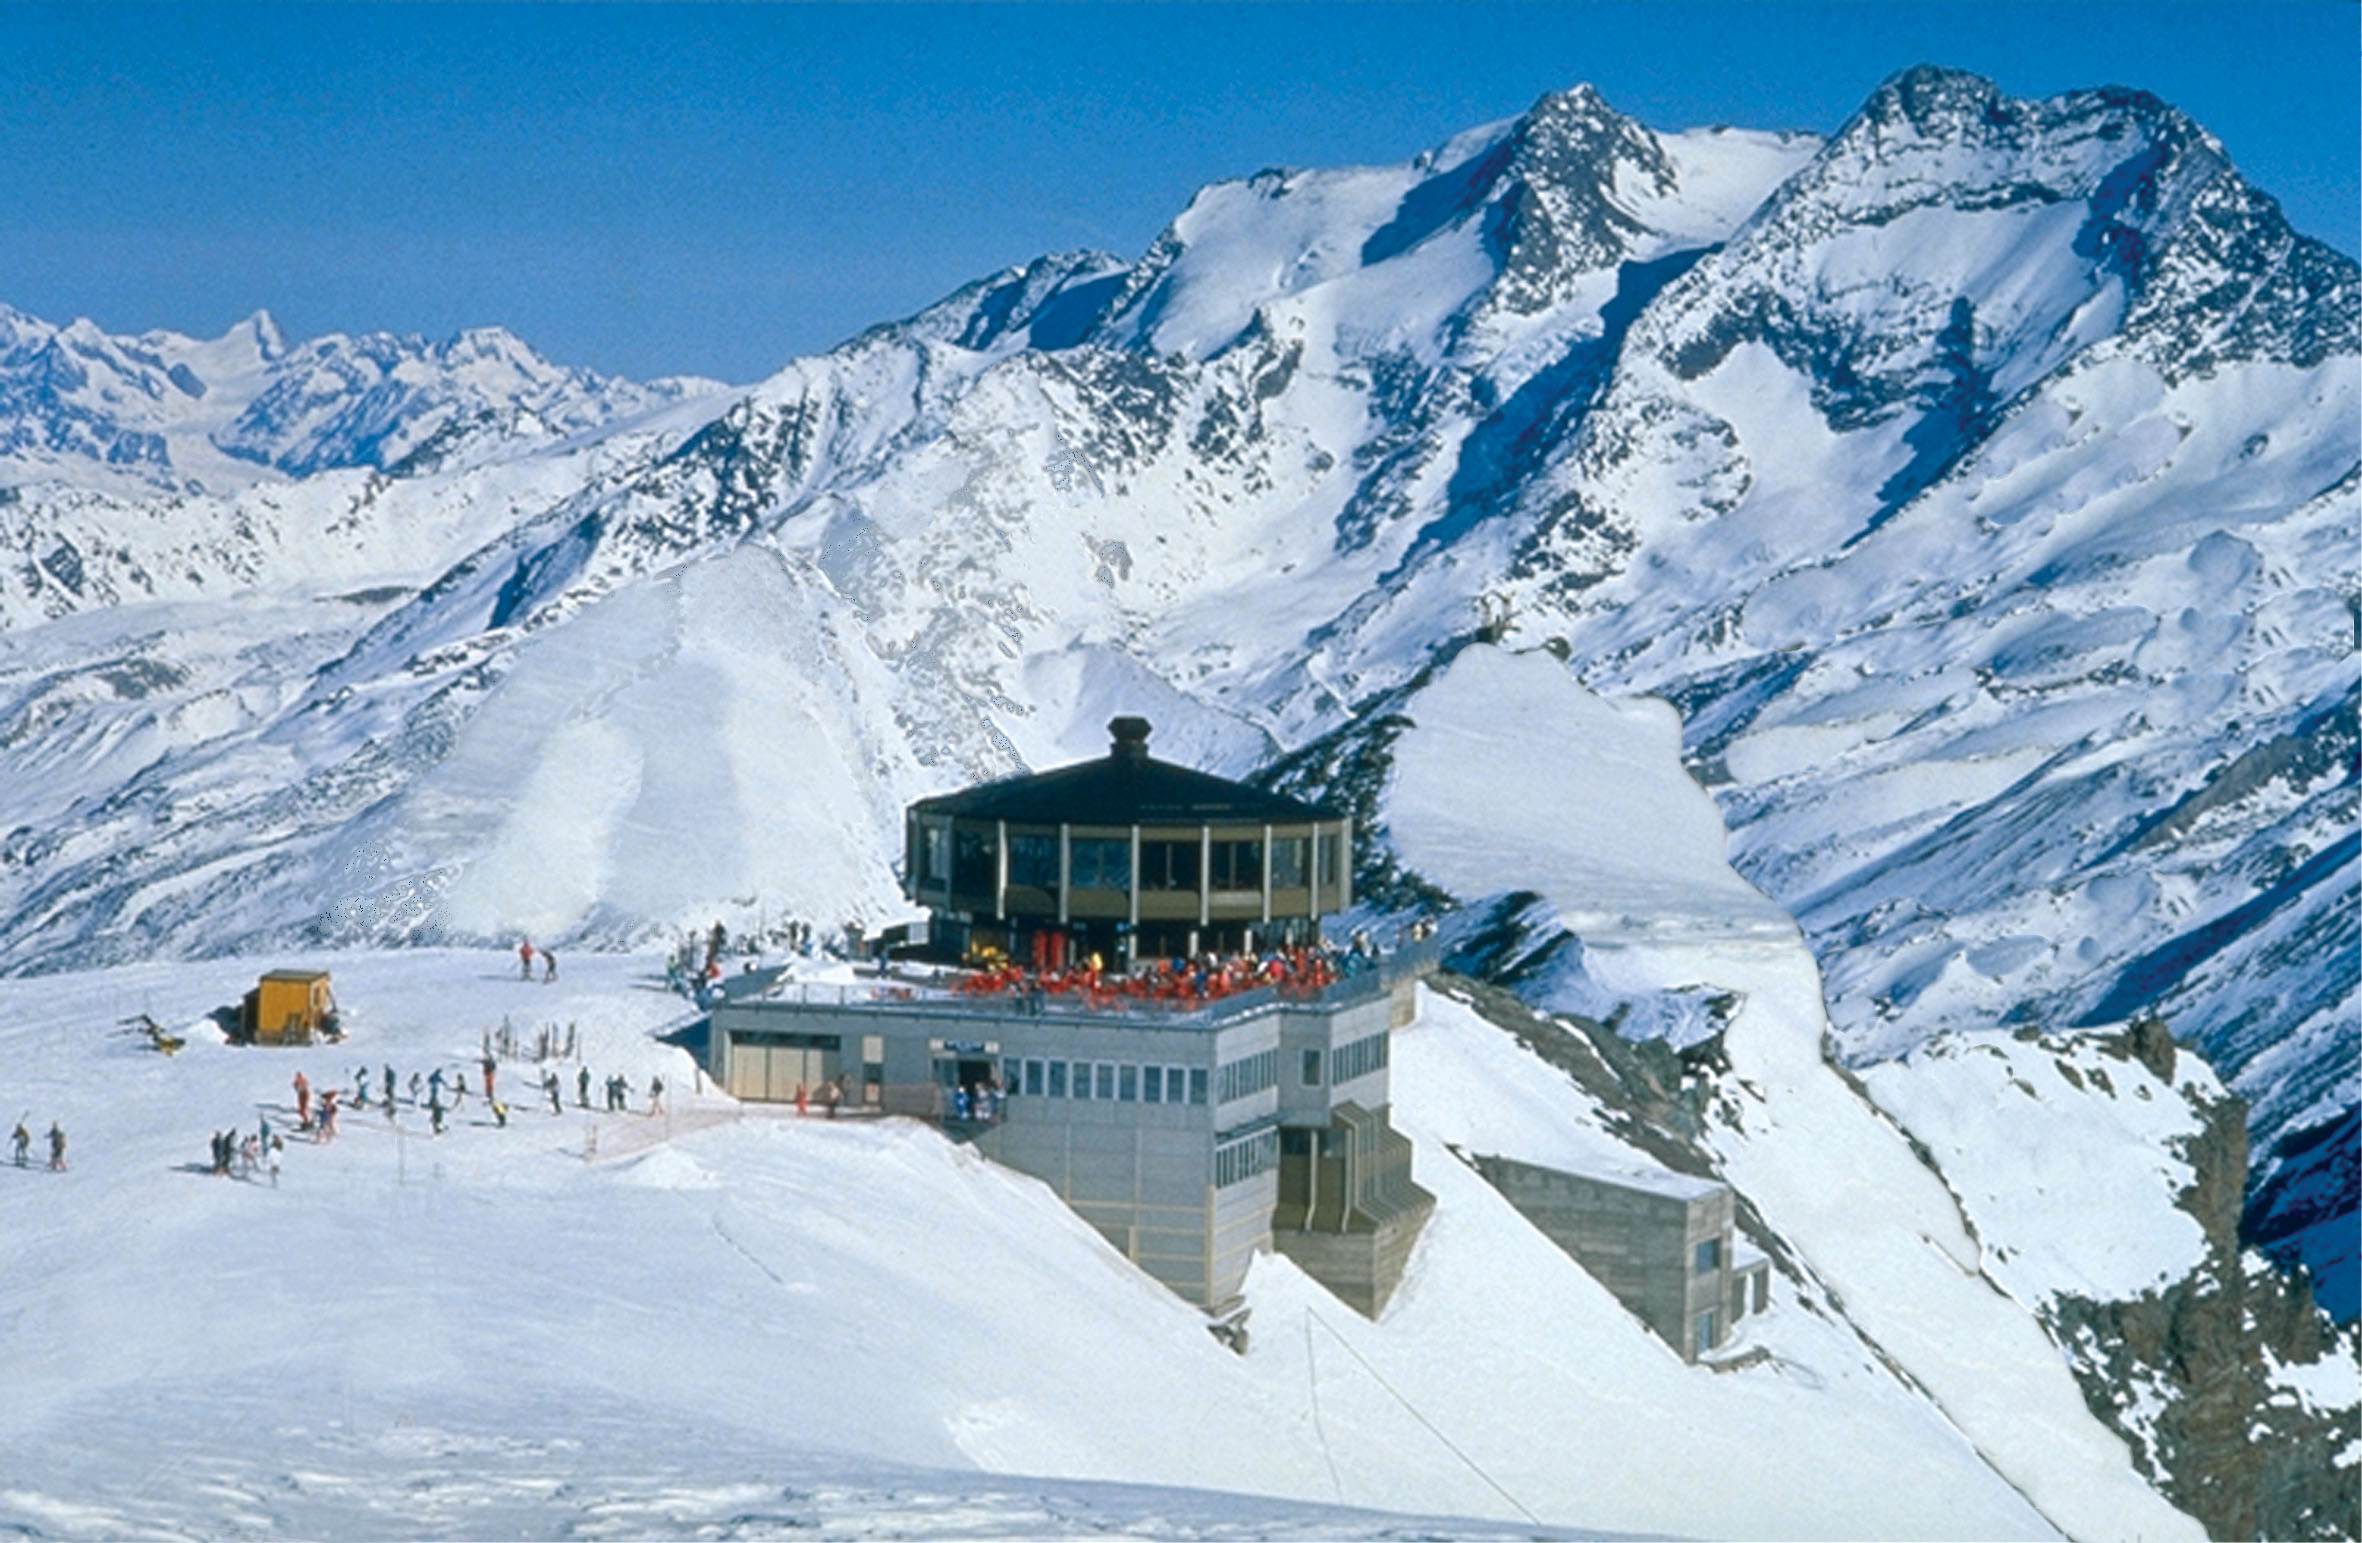 Ski base on the background of mountains in the ski resort of Arabba